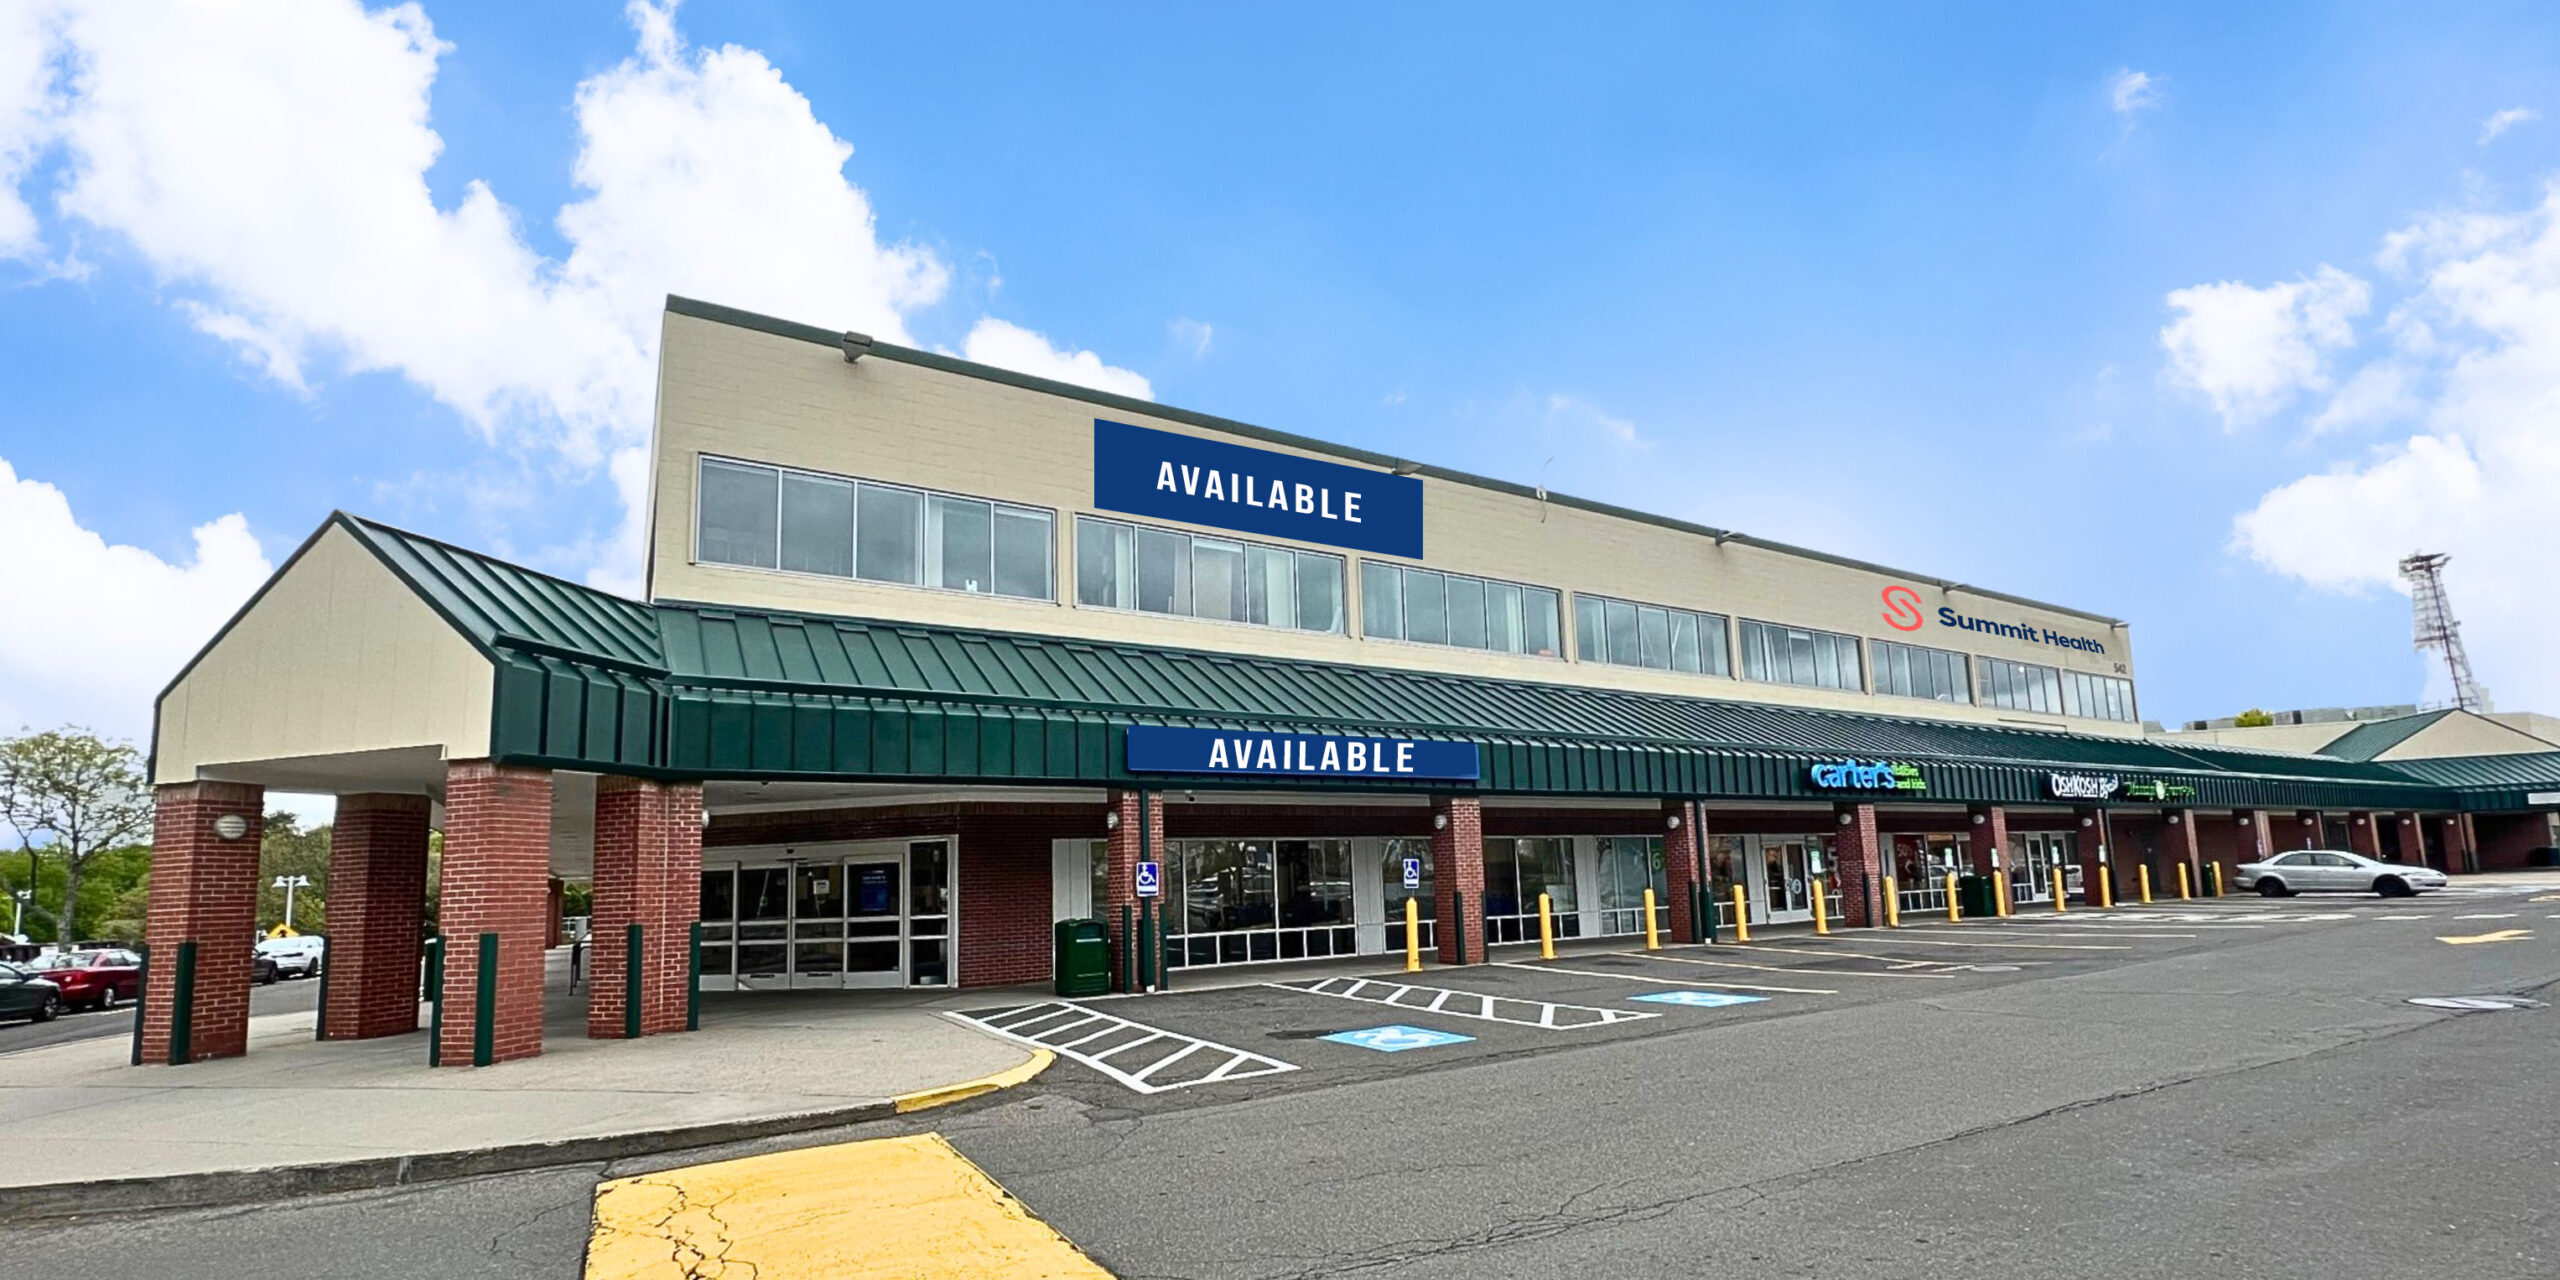 1---30,000-SF-Retail-Space-Available-on-the-1st-Floor